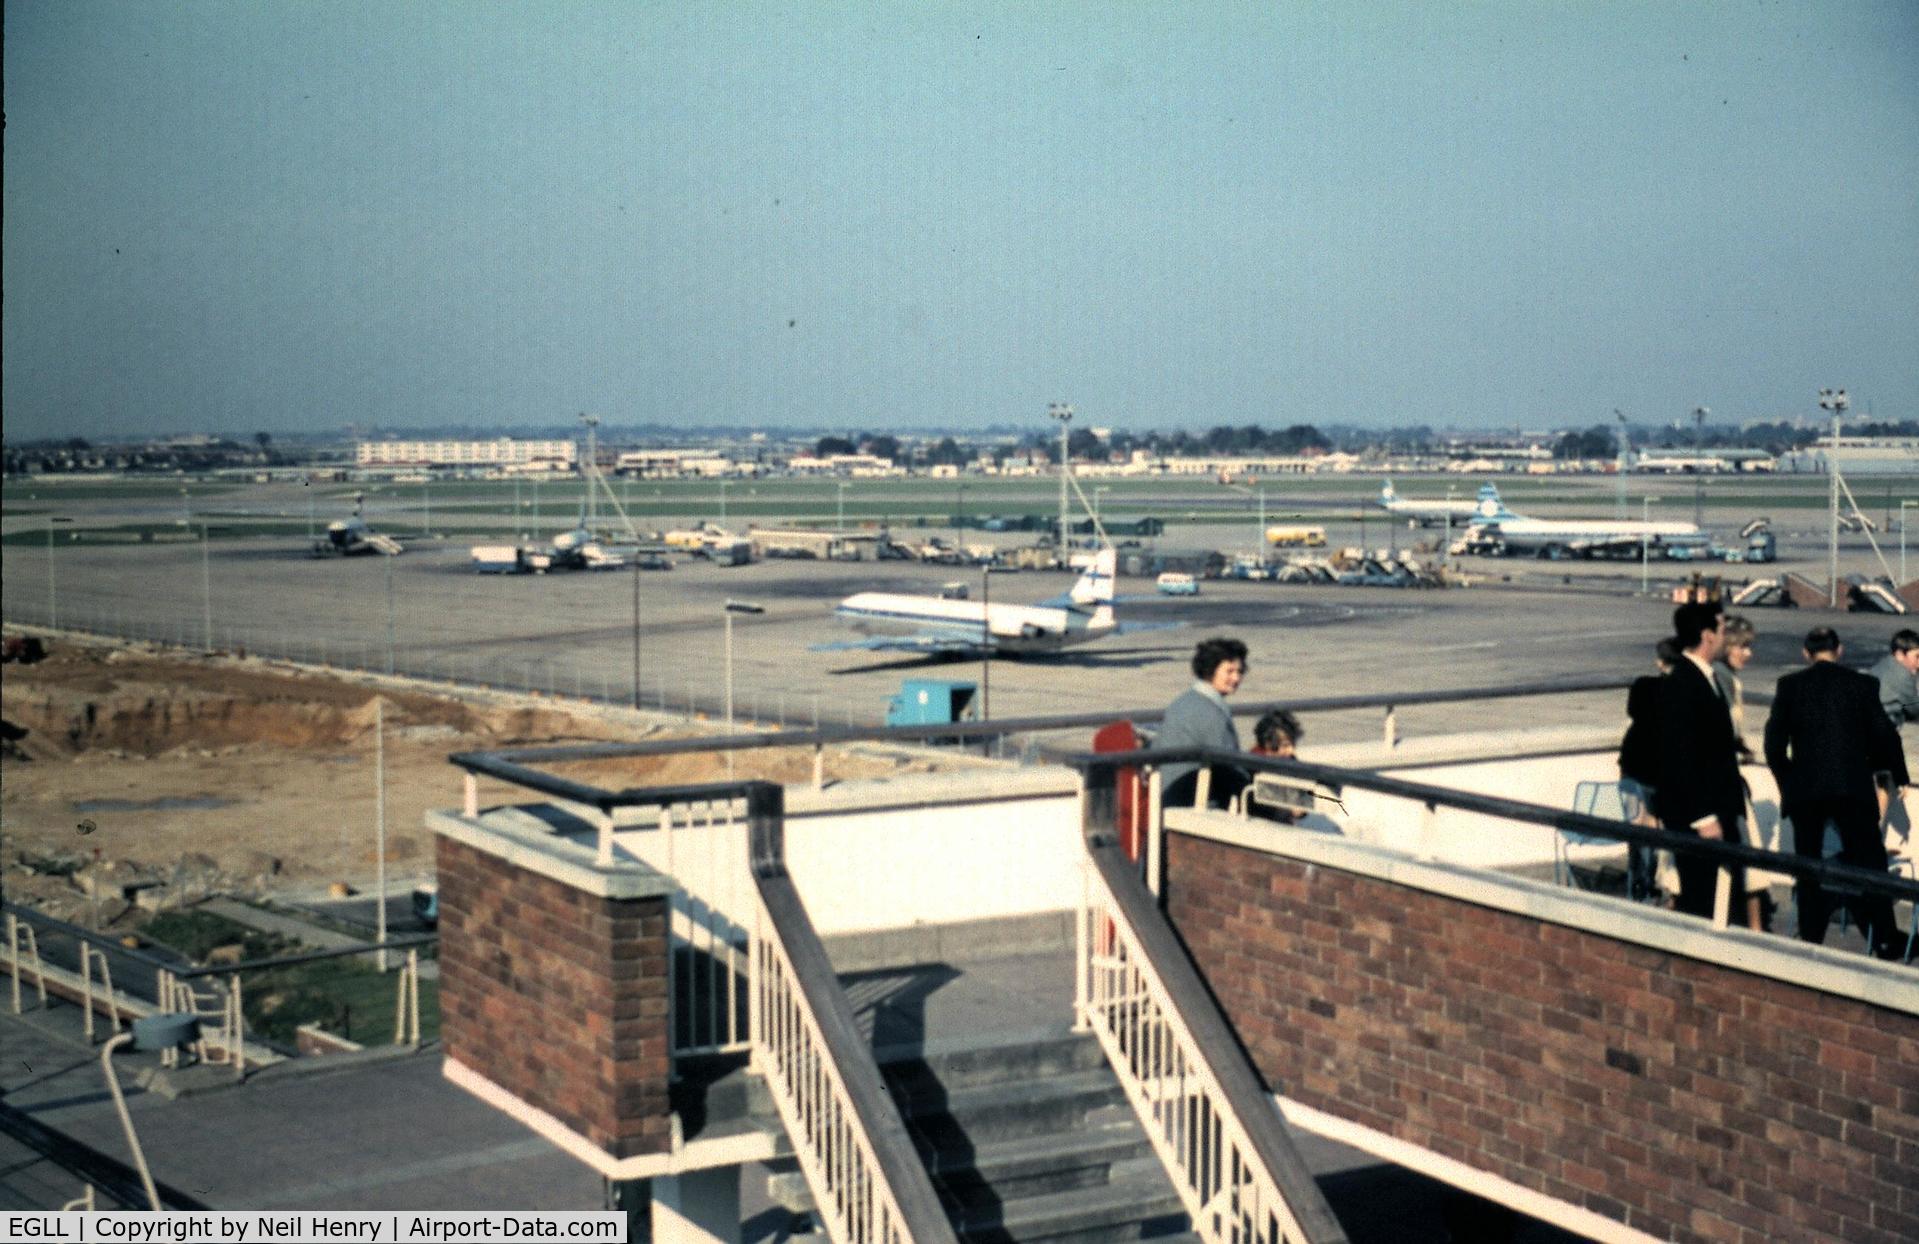 London Heathrow Airport, London, England United Kingdom (EGLL) - Scanned from original slide taken October 1965 from public viewing area 